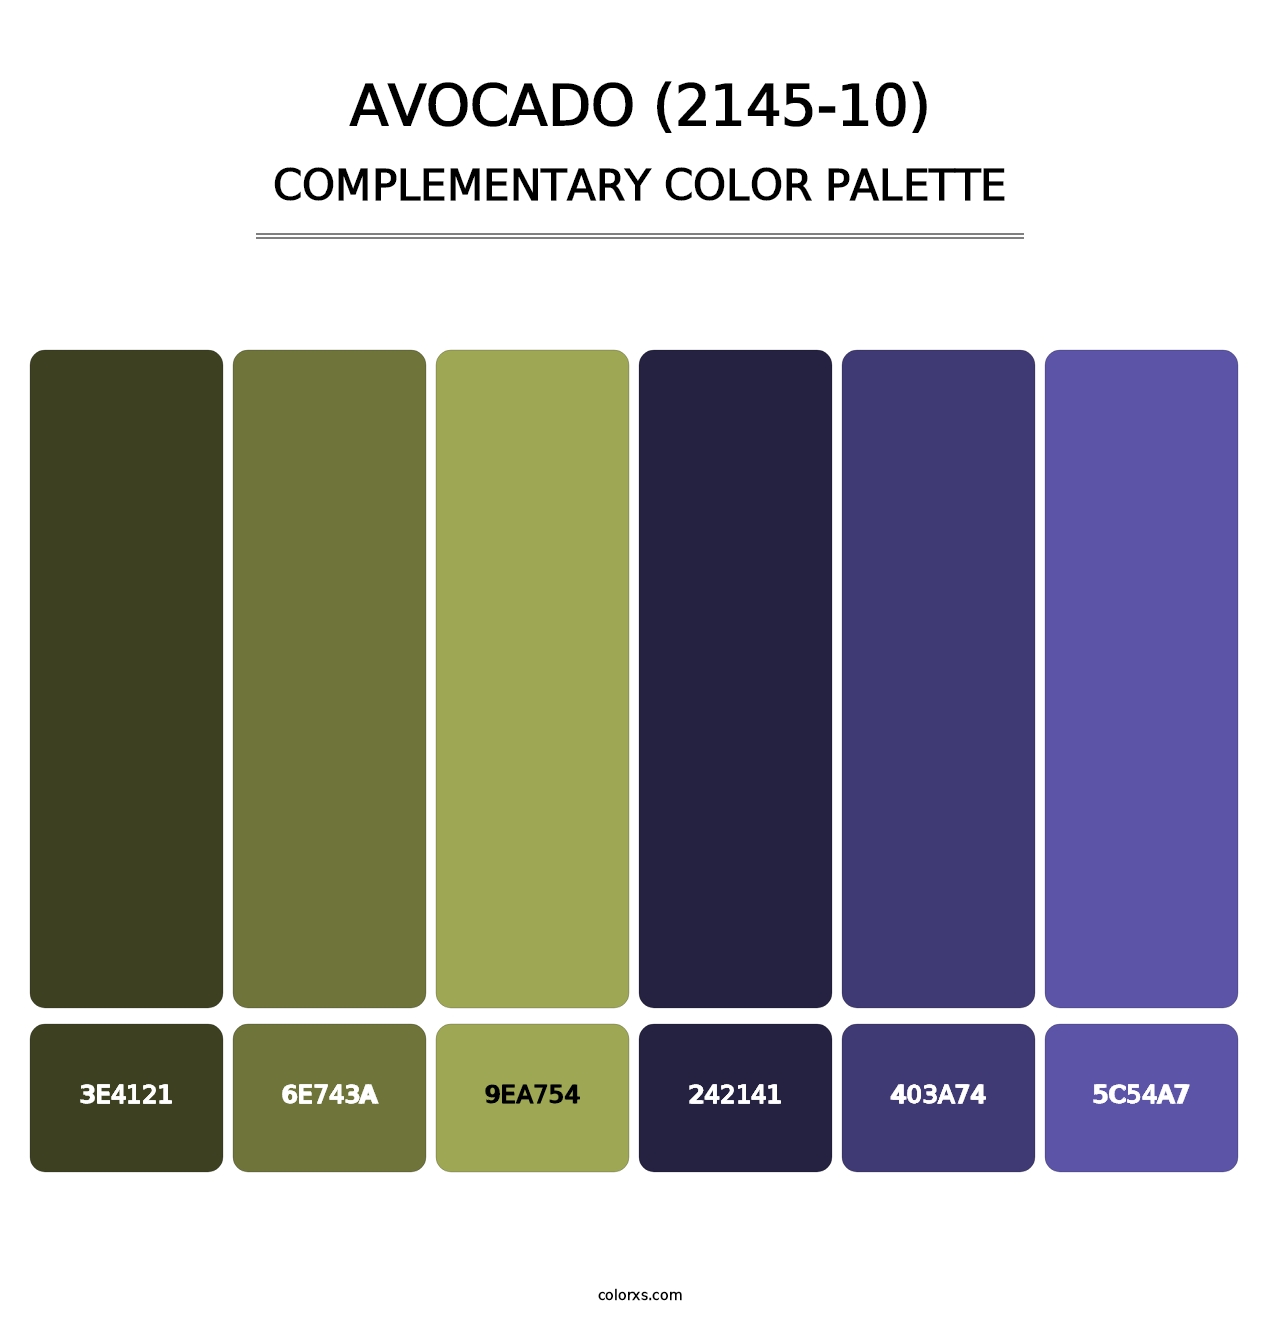 Avocado (2145-10) - Complementary Color Palette